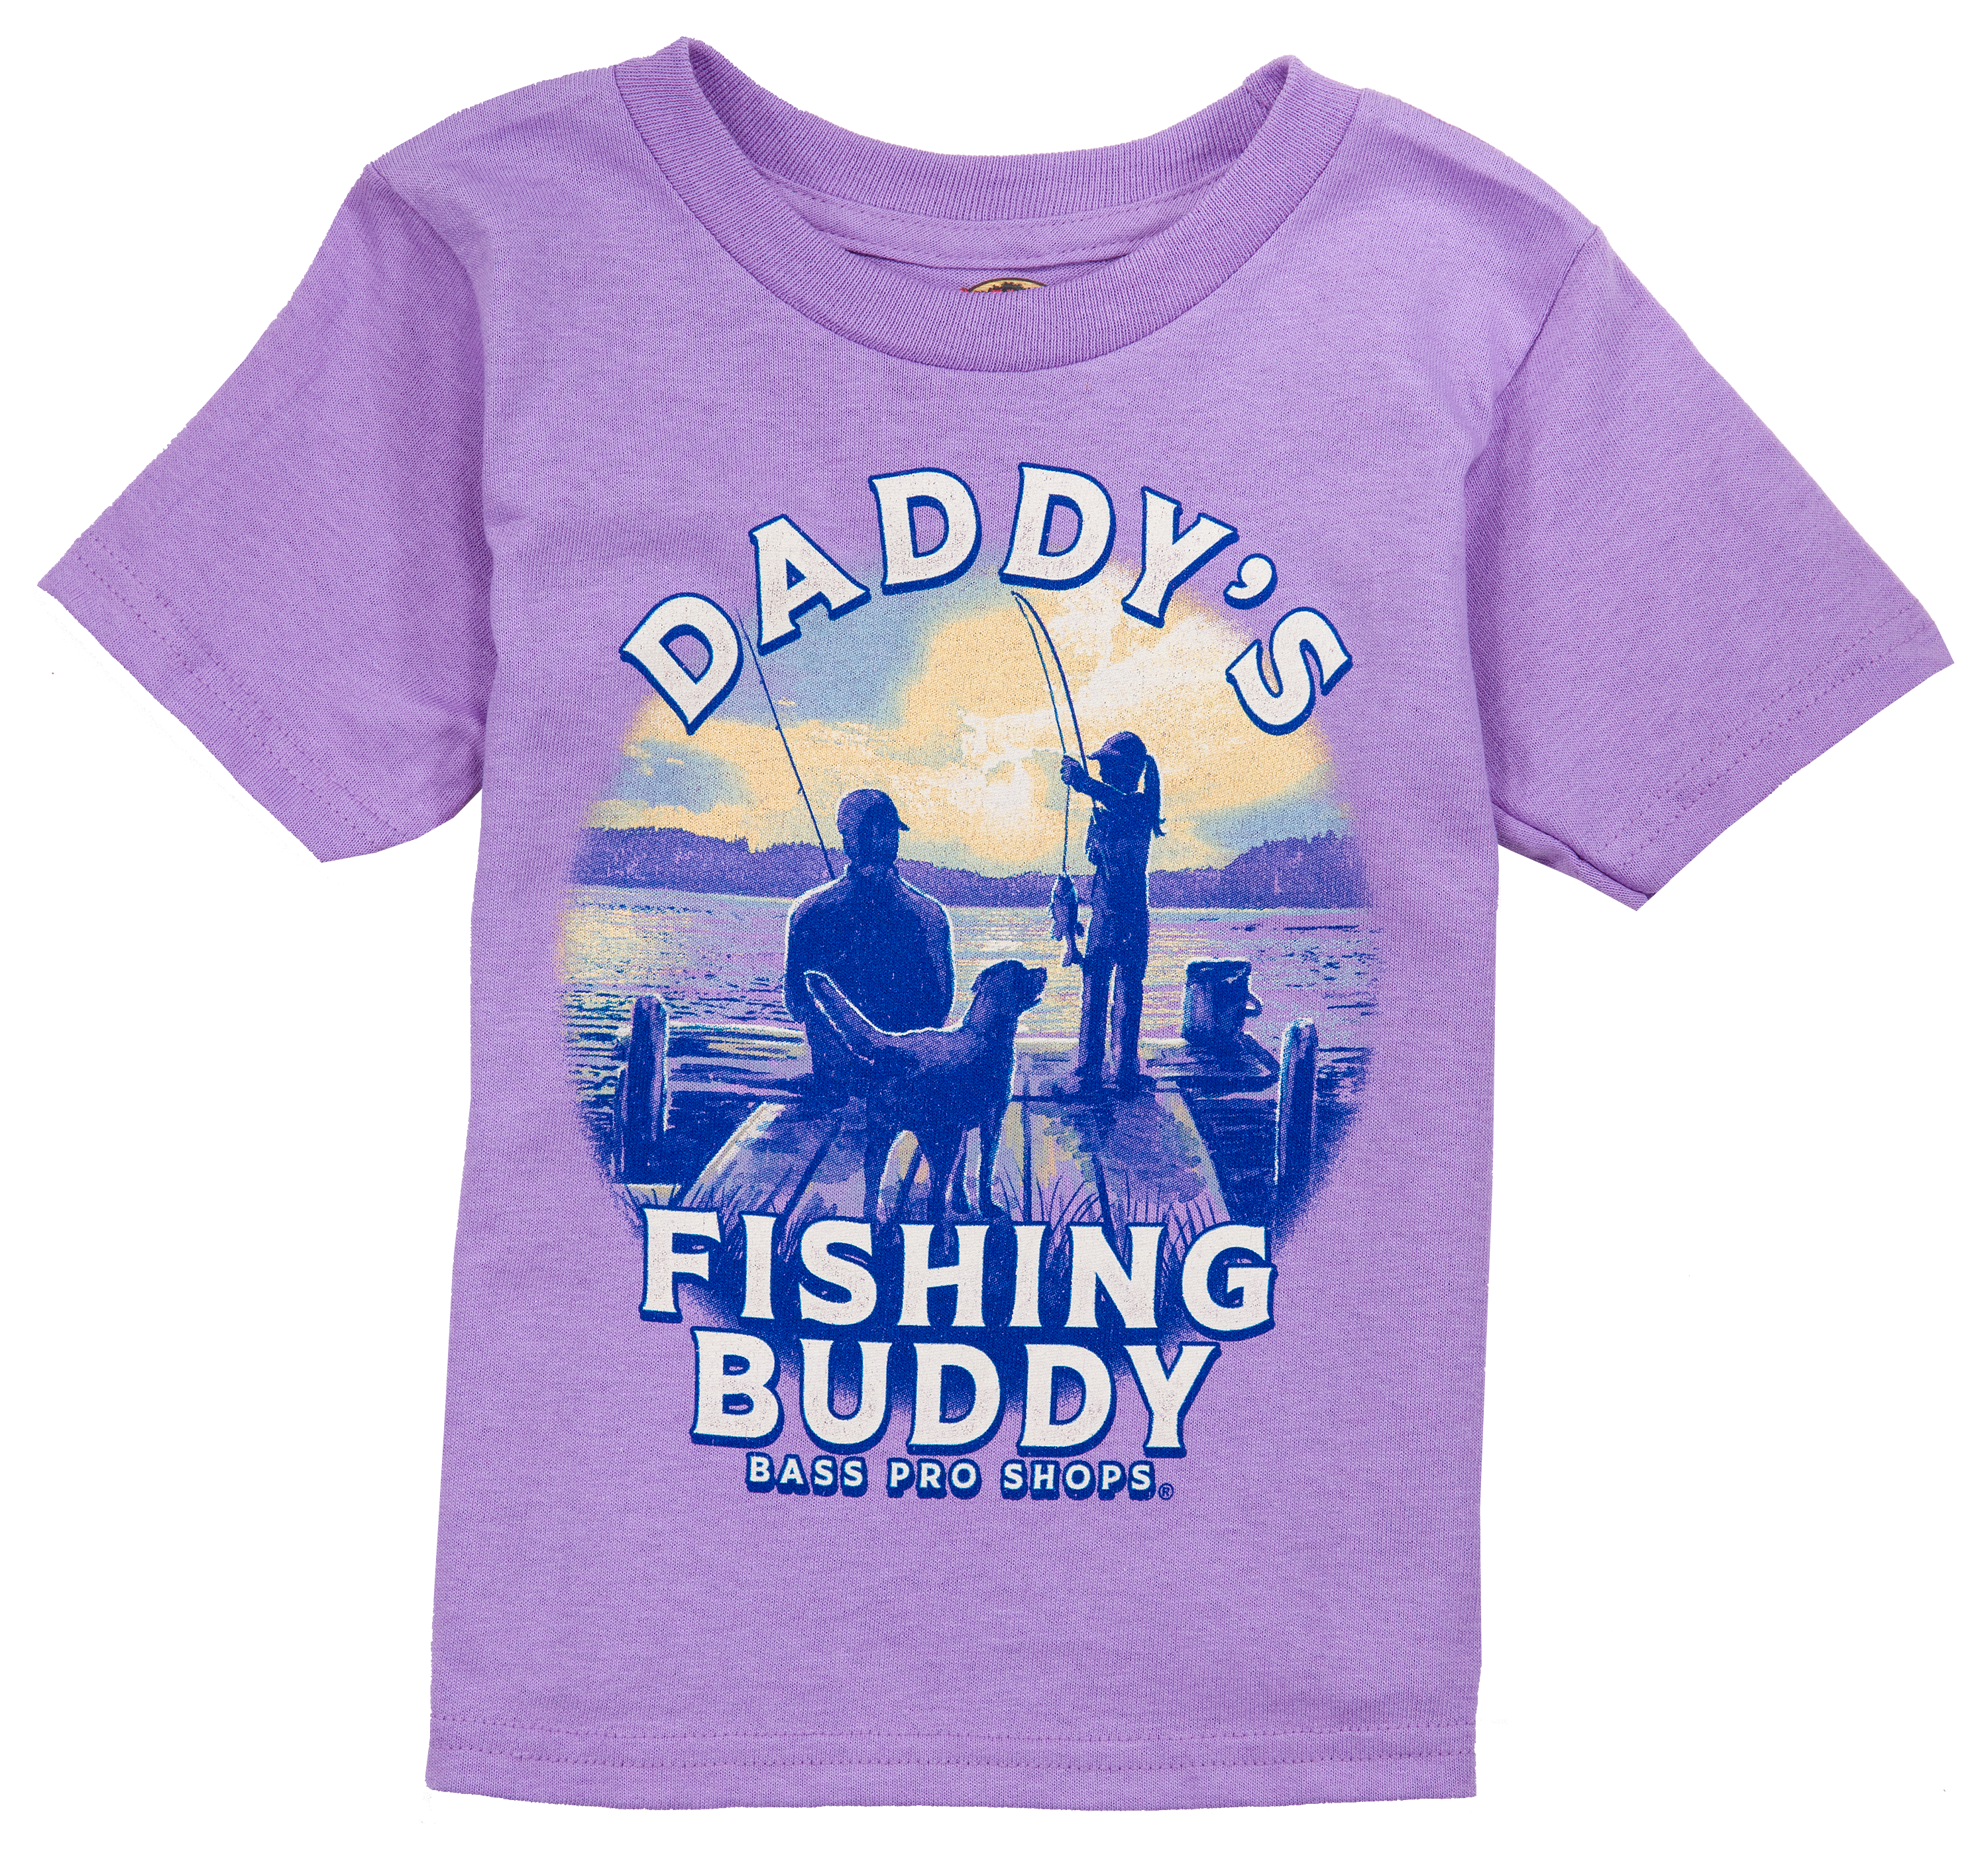 Bass Pro Shops Fishing Buddy Short-Sleeve T-Shirt for Toddlers or Girls